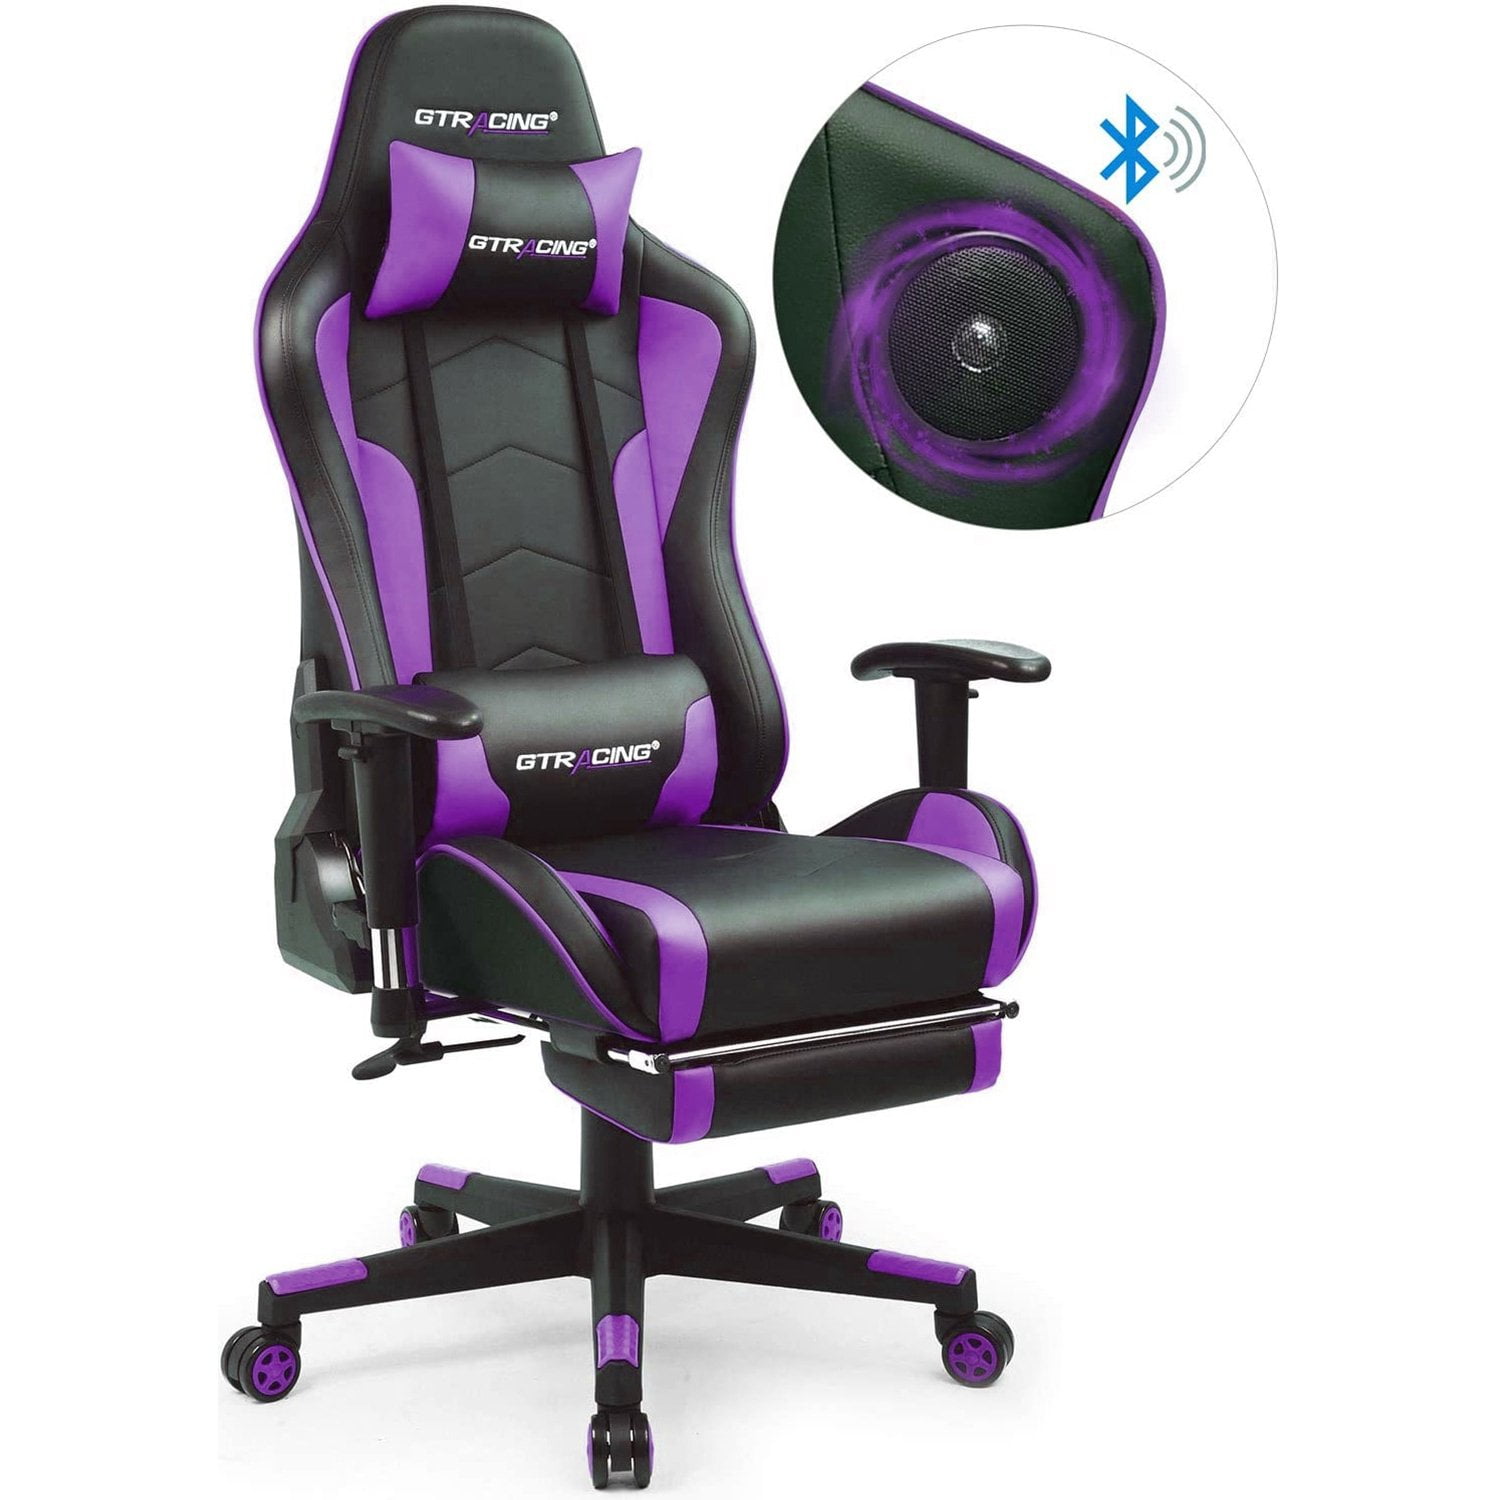 GTRACING Gaming Chair with Speakers Bluetooth and Footrest in Home Leather Office Chair, Purple